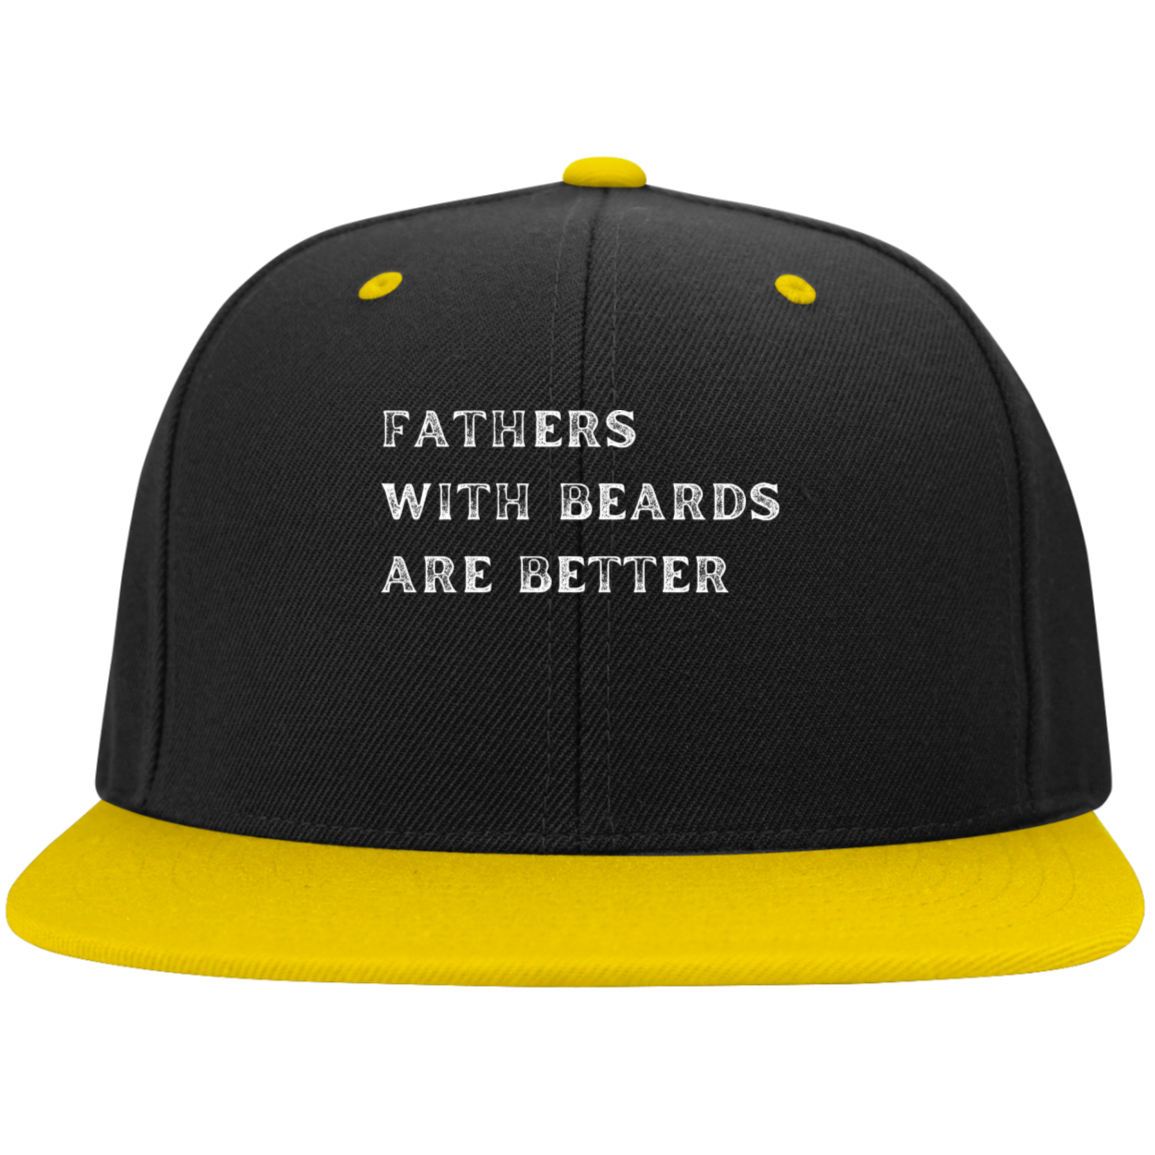 FATHERS WITH BEARDS ARE BETTER Flat Bill High-Profile Snapback Hat